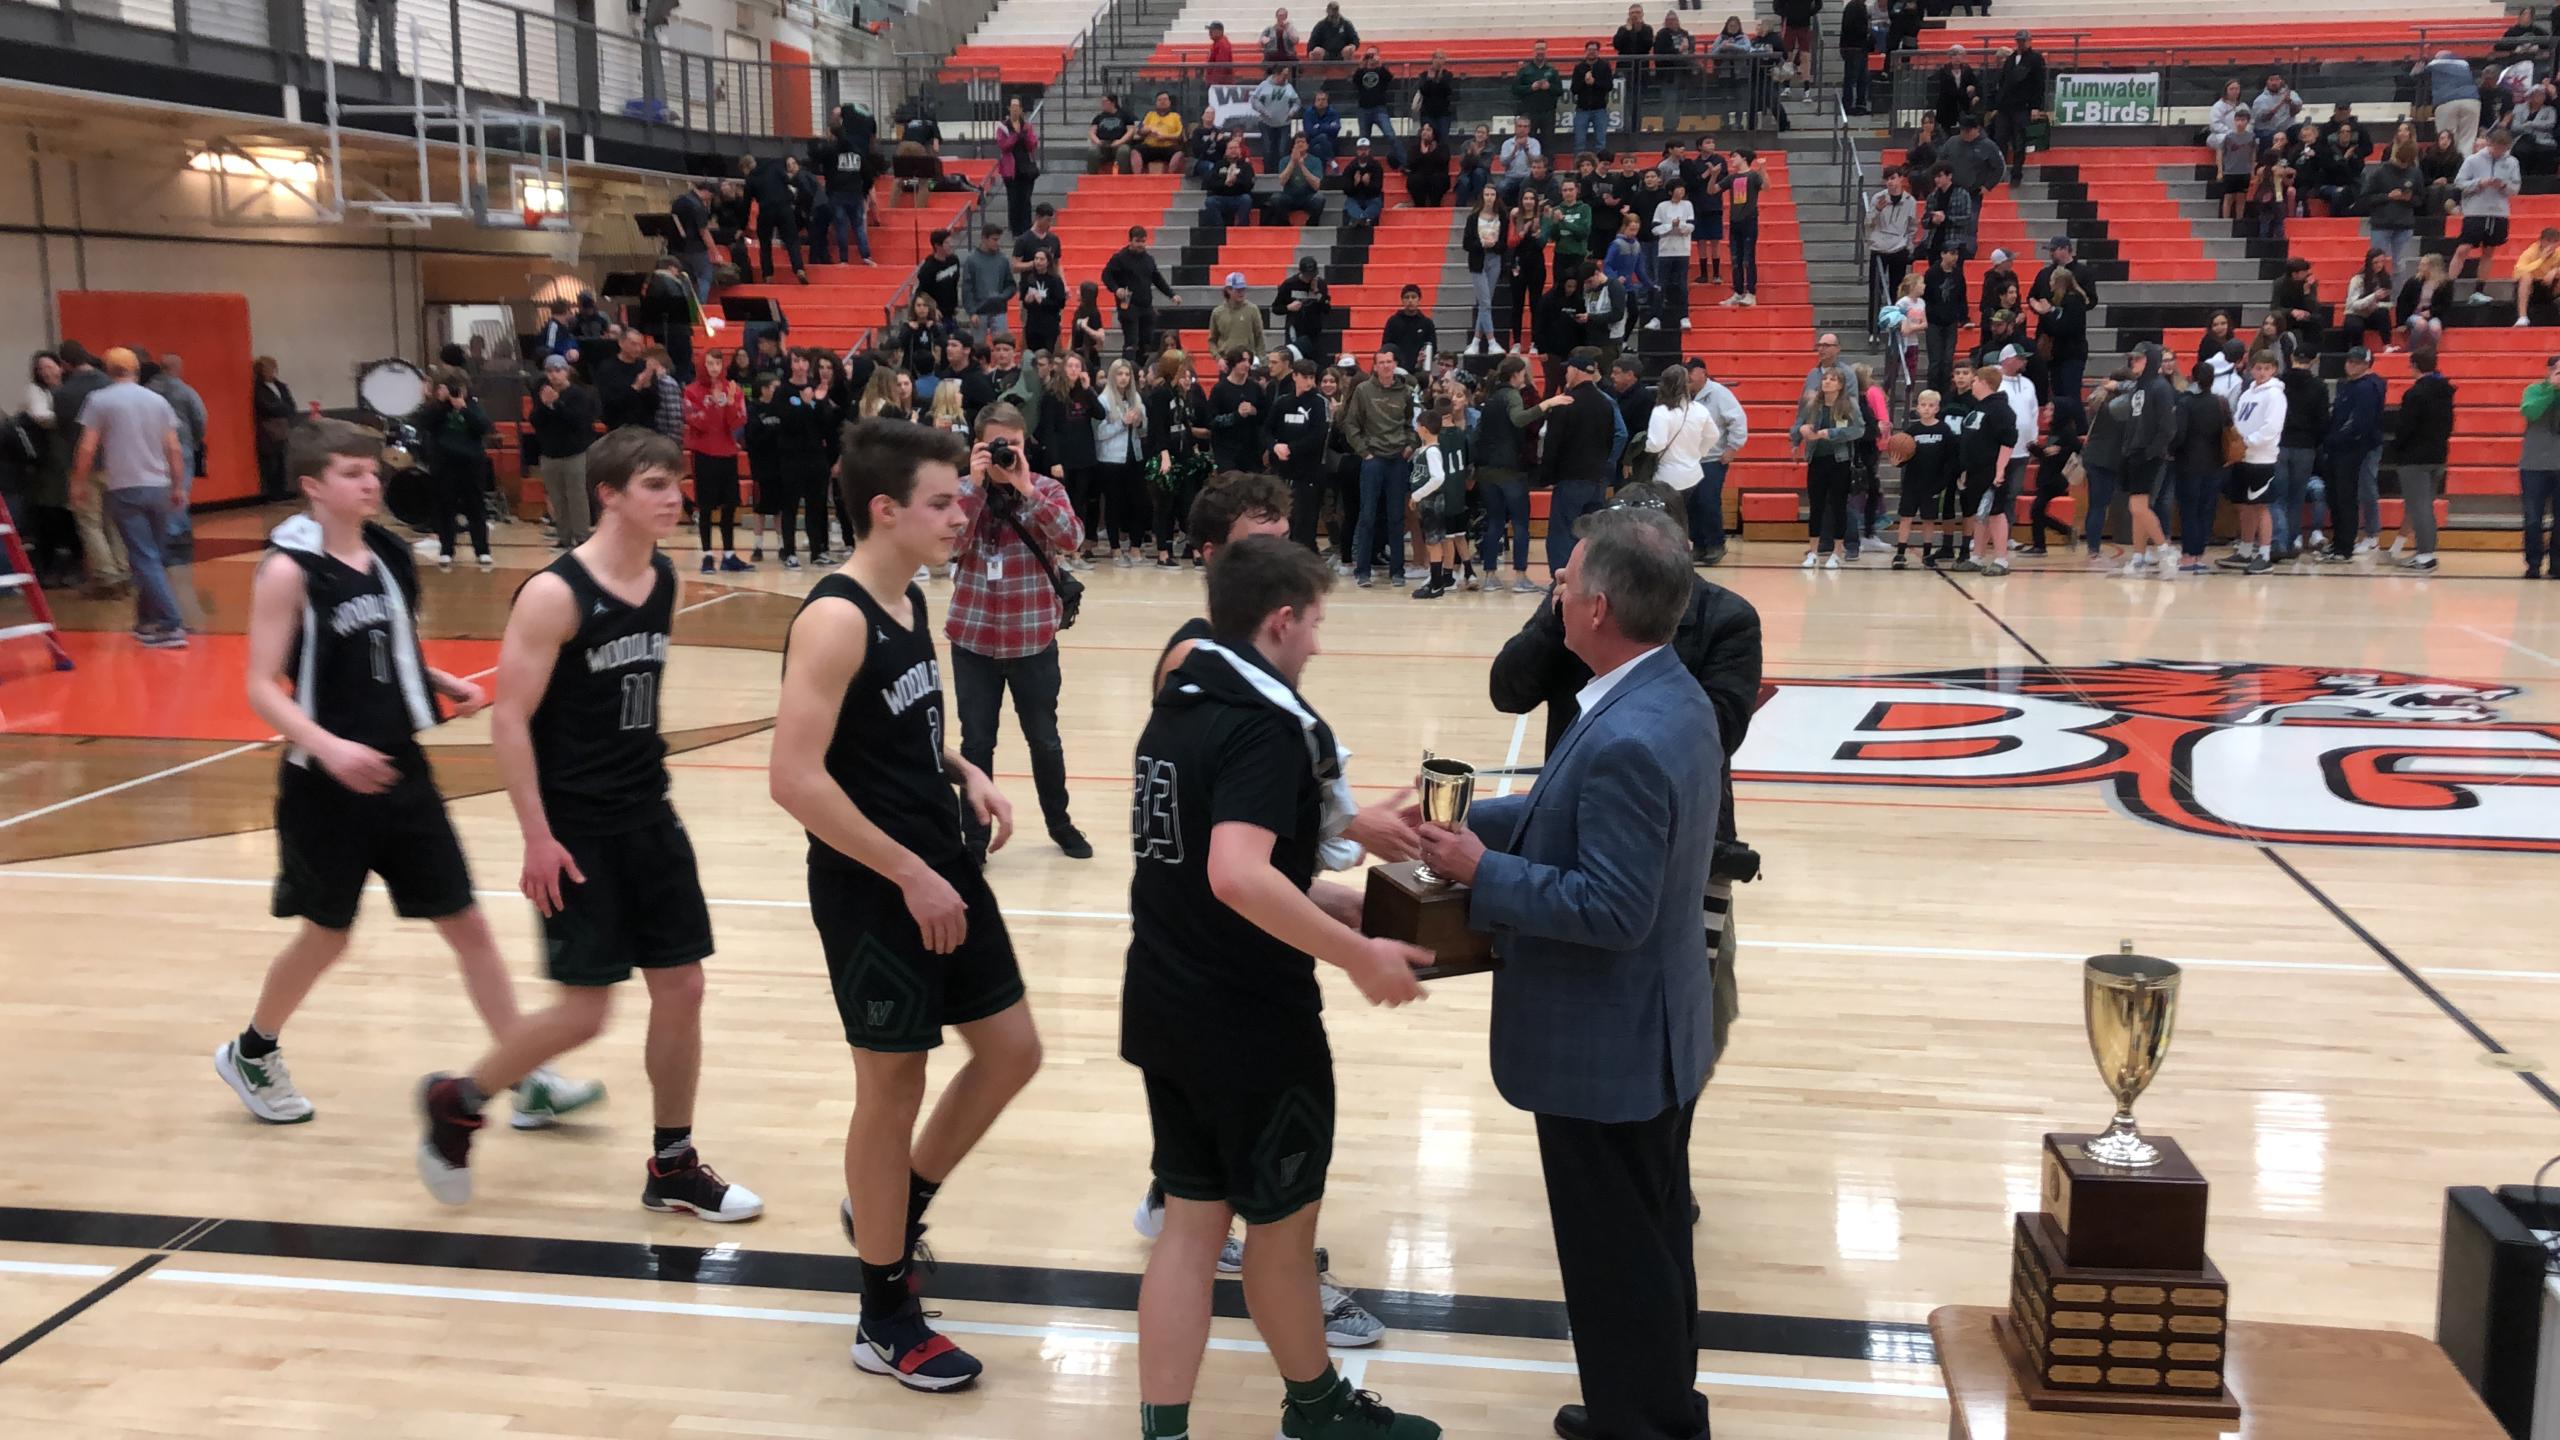 The Woodland boys basketball team receives the 2A district tournament runner-up trophy from tournament director Rob Blackman after a 63-28 loss to Tumwater in the championship game Friday at Battle Ground High School.